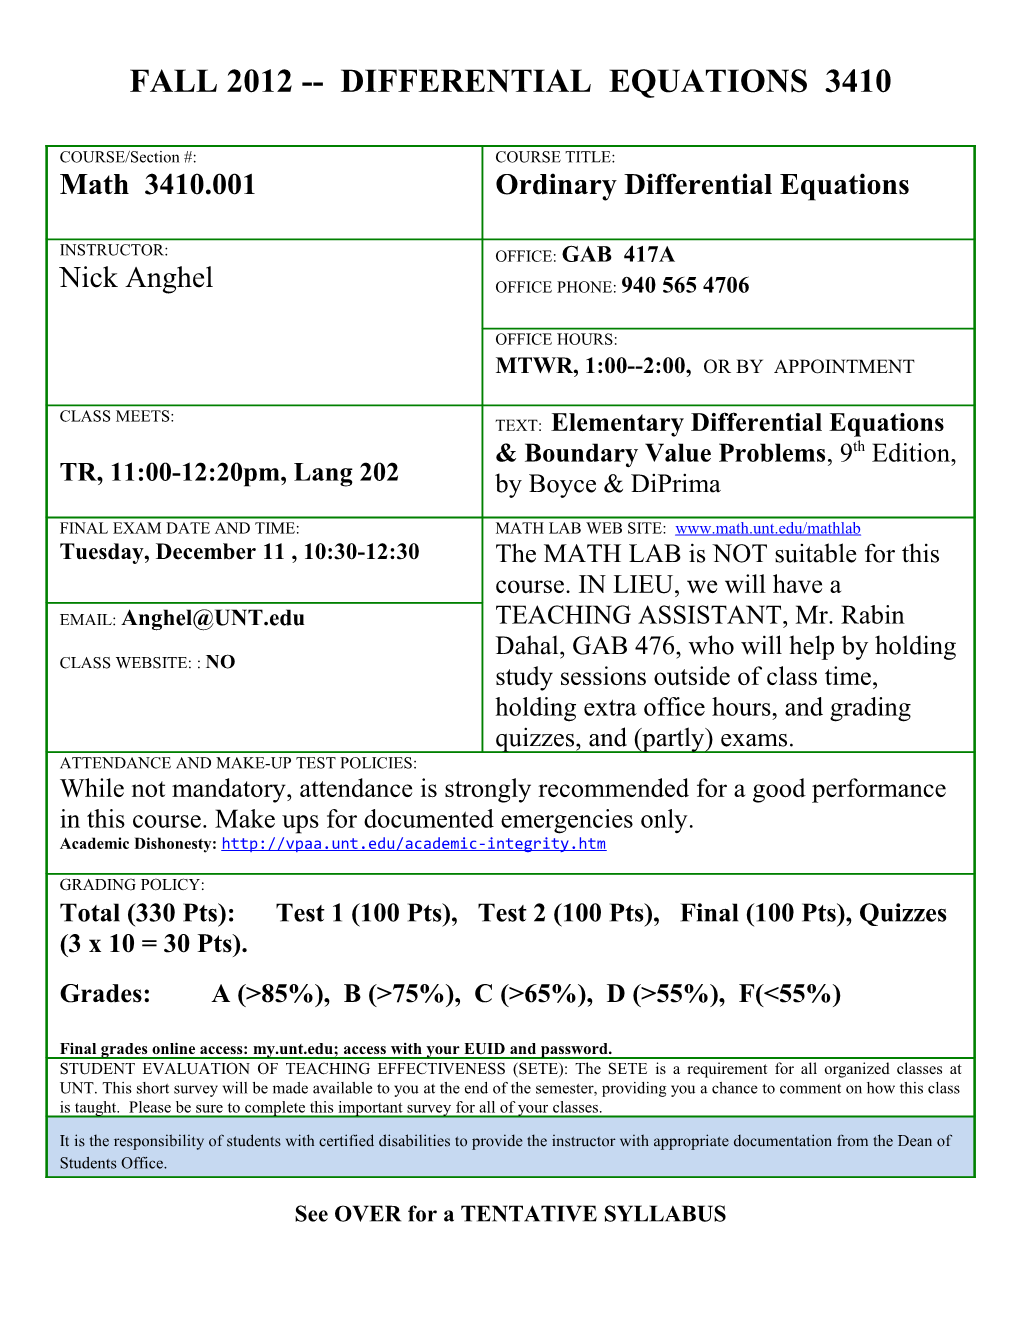 Fall 2012 Differential Equations 3410